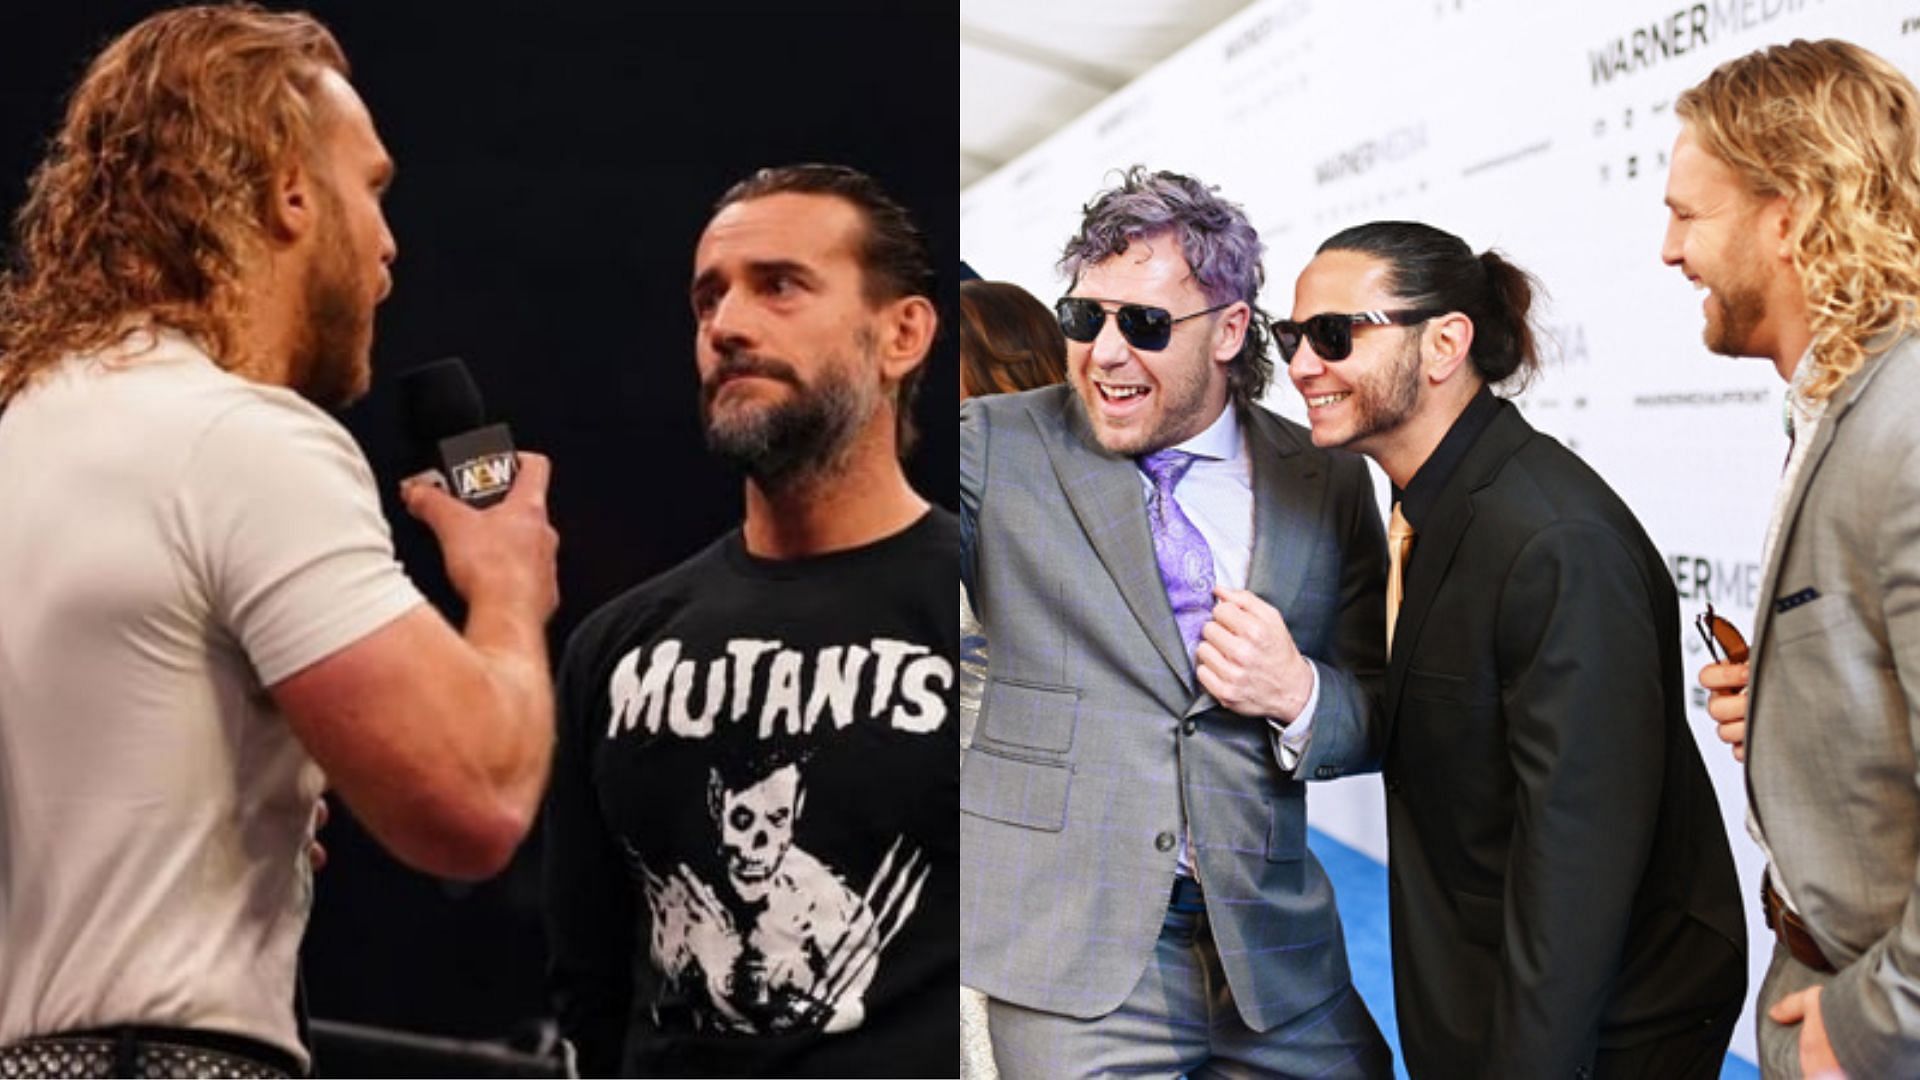 The Elite and Hangman Adam Page have been part of AEW since day one